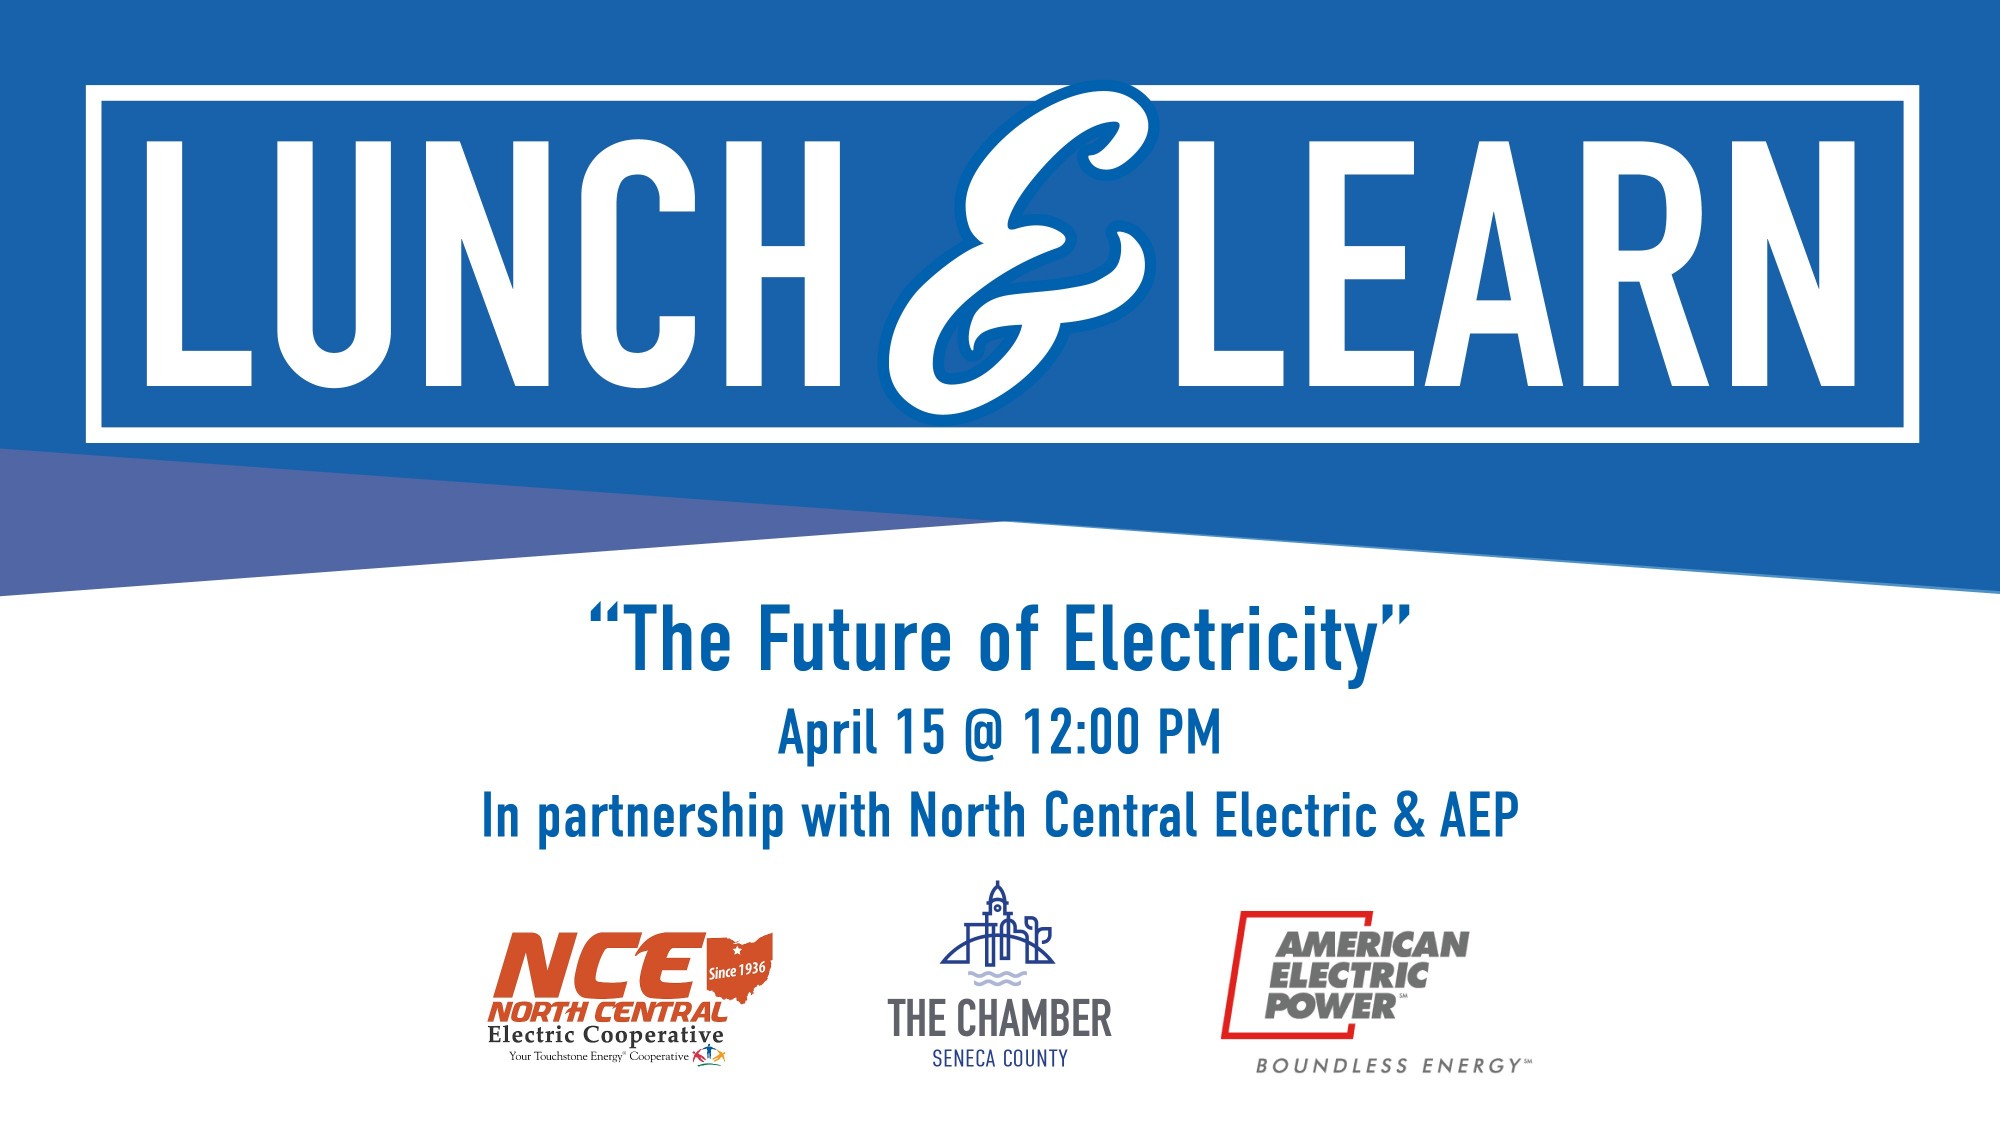 Lunch & Learn:  The Future of Electricity